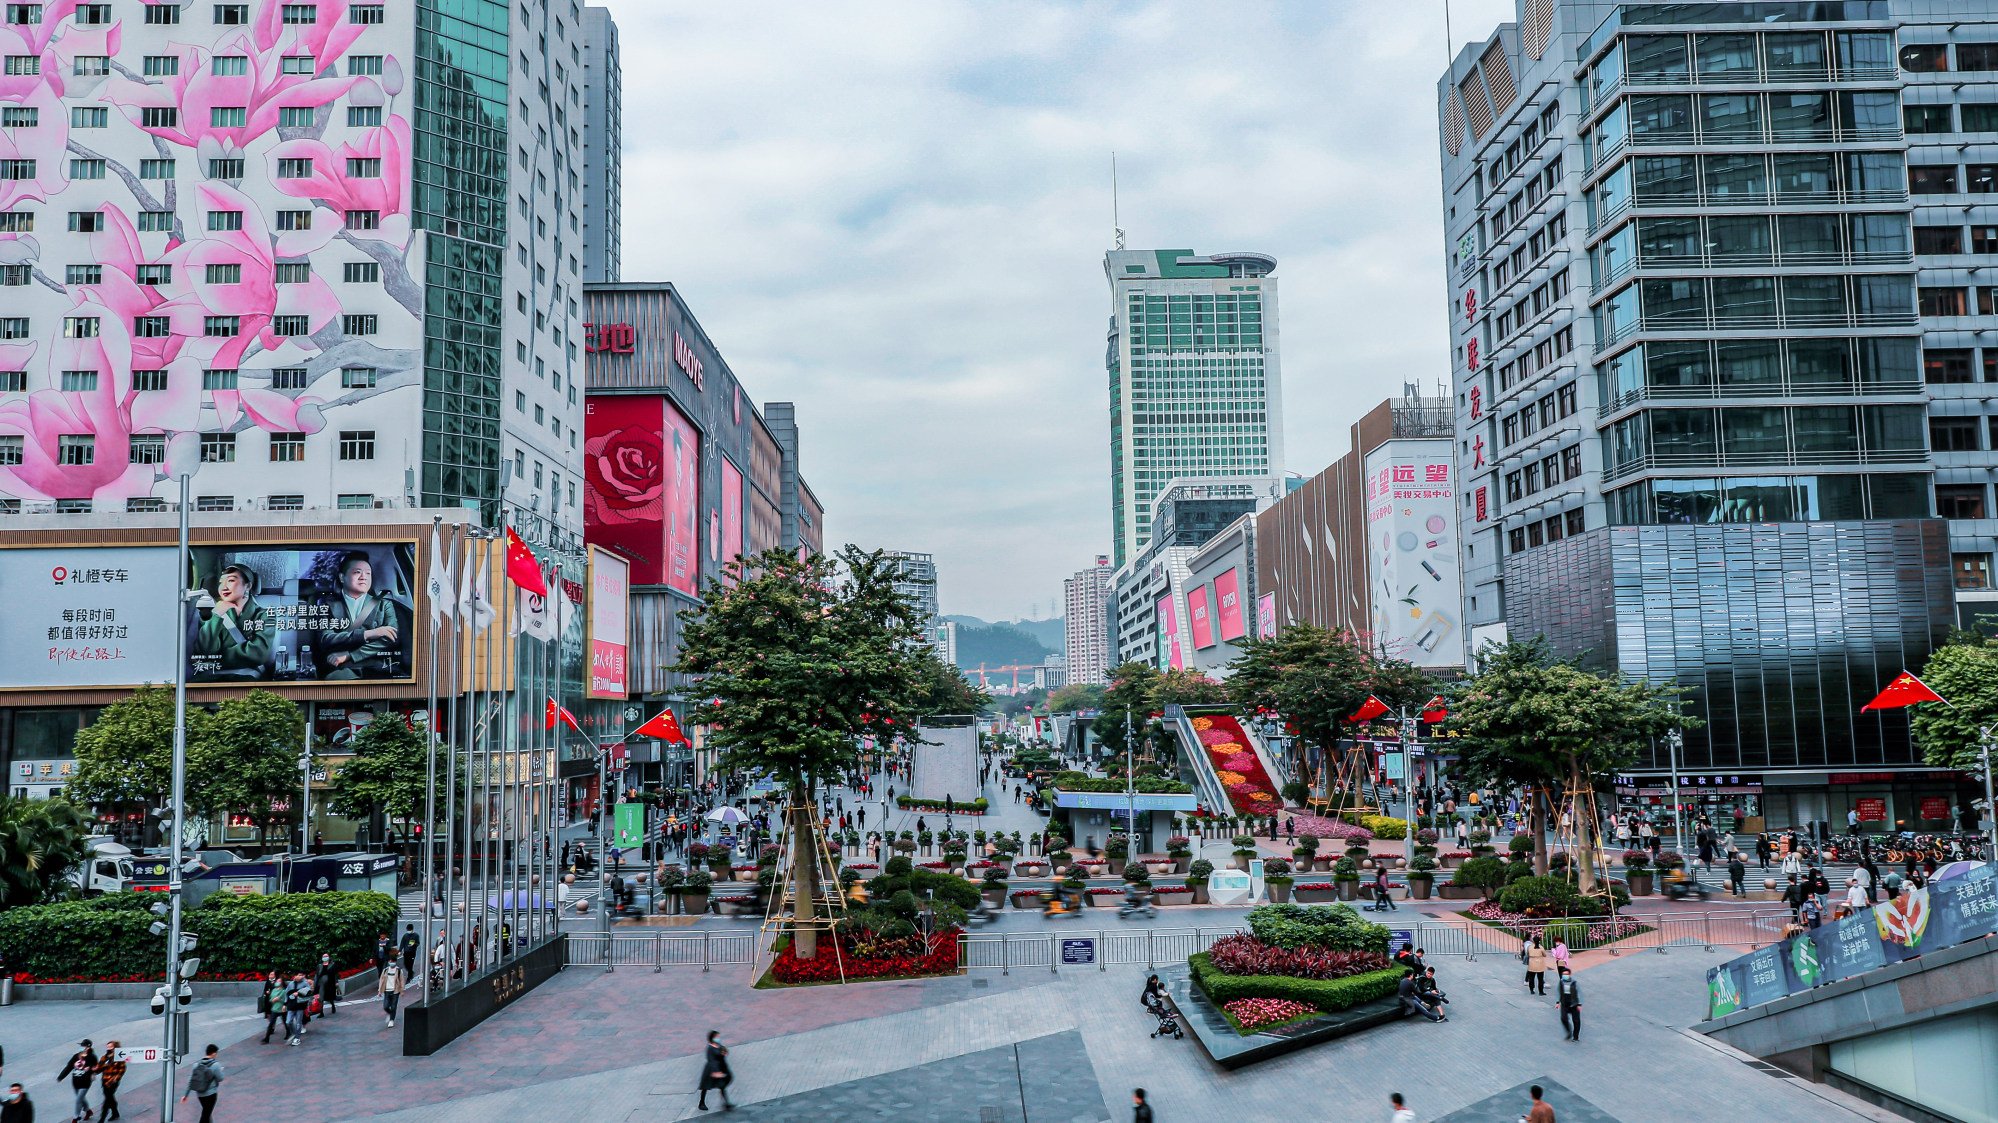 Huaqiangbei, the world’s biggest wholesale electronics marketplace, in the Futian district of tech hub Shenzhen, southern Guangdong province. Photo: Shutterstock